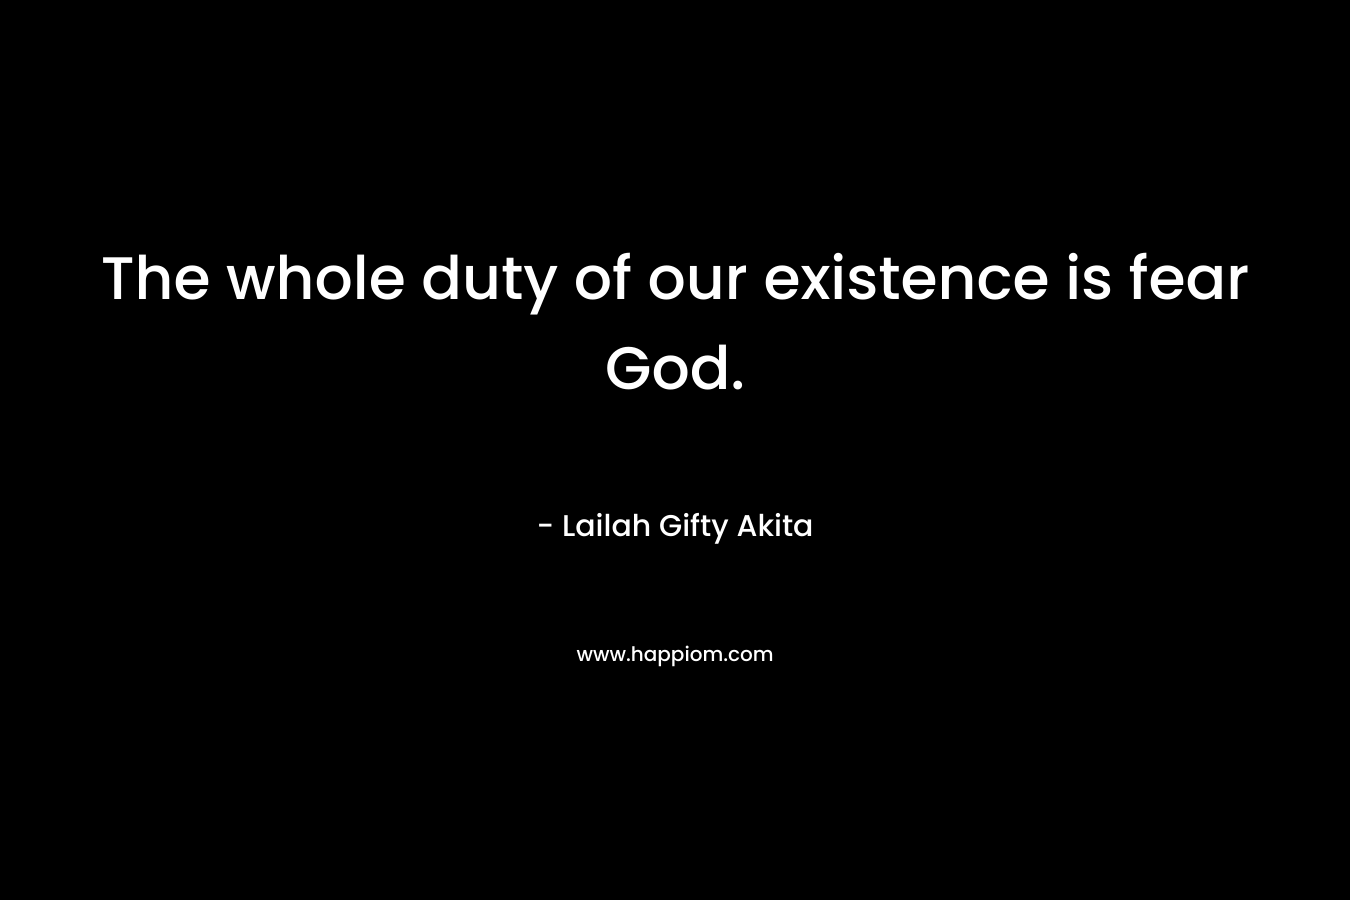 The whole duty of our existence is fear God.